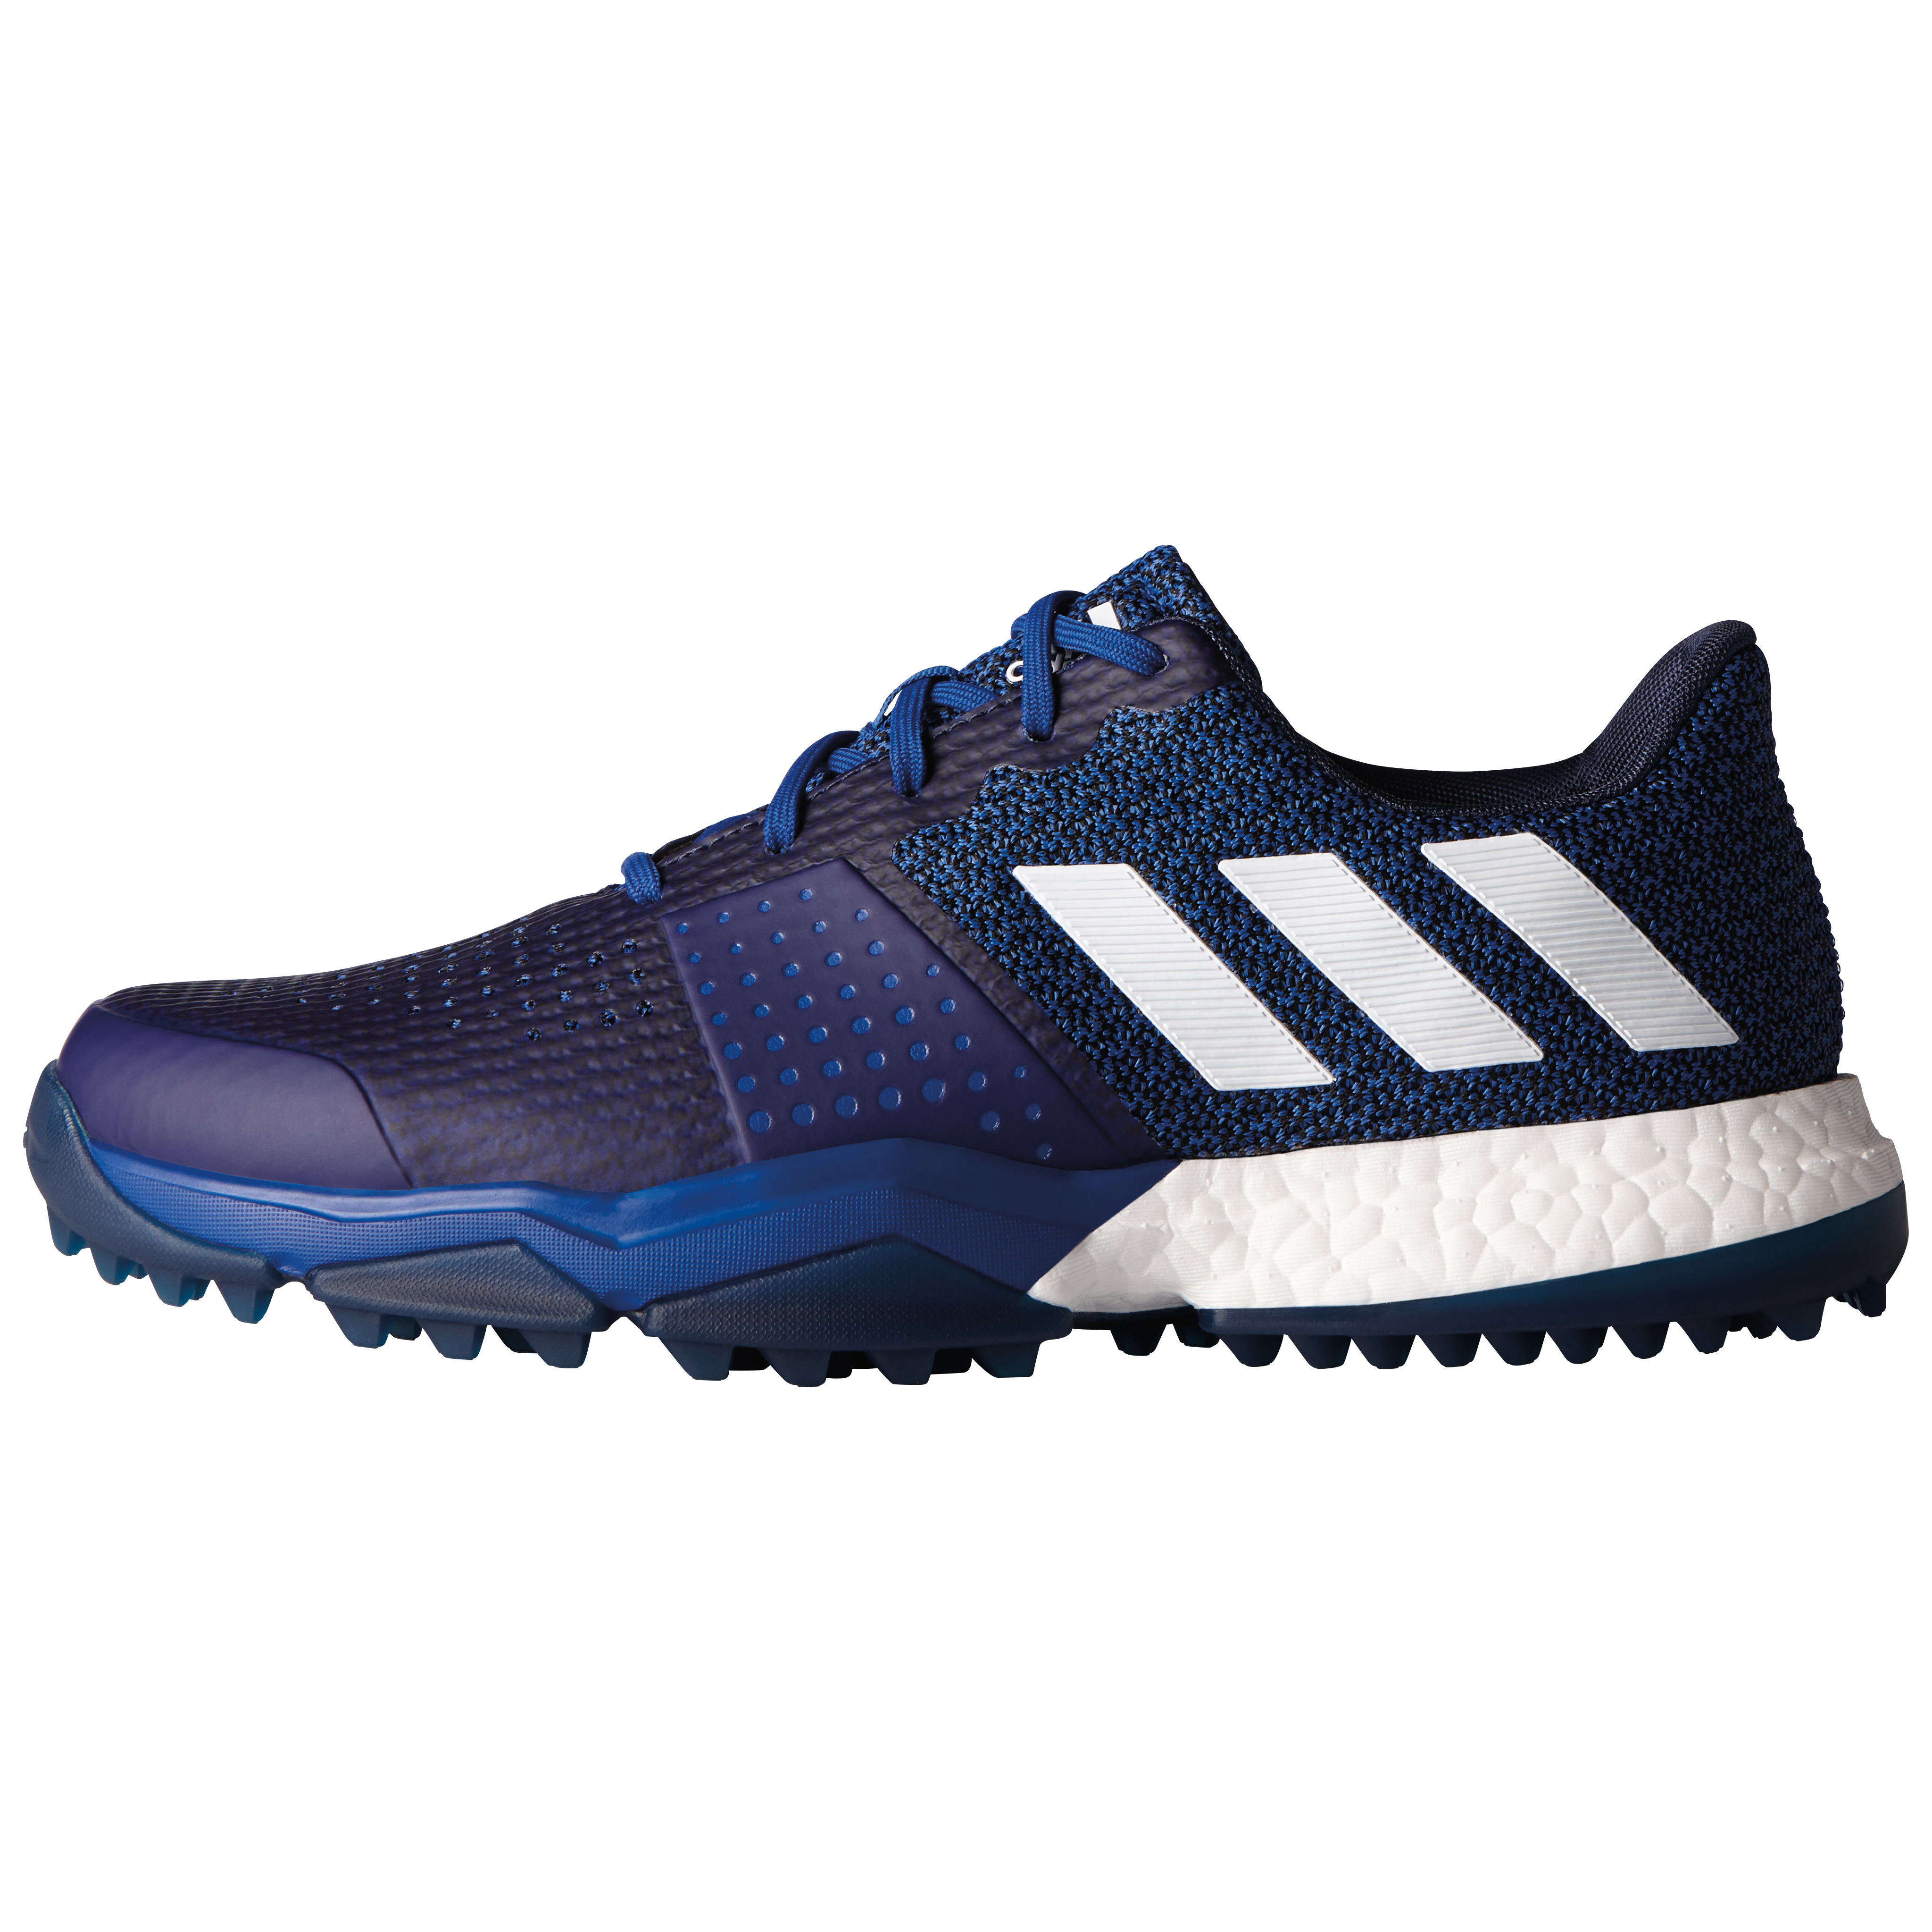 adidas adipower s boost golf shoes